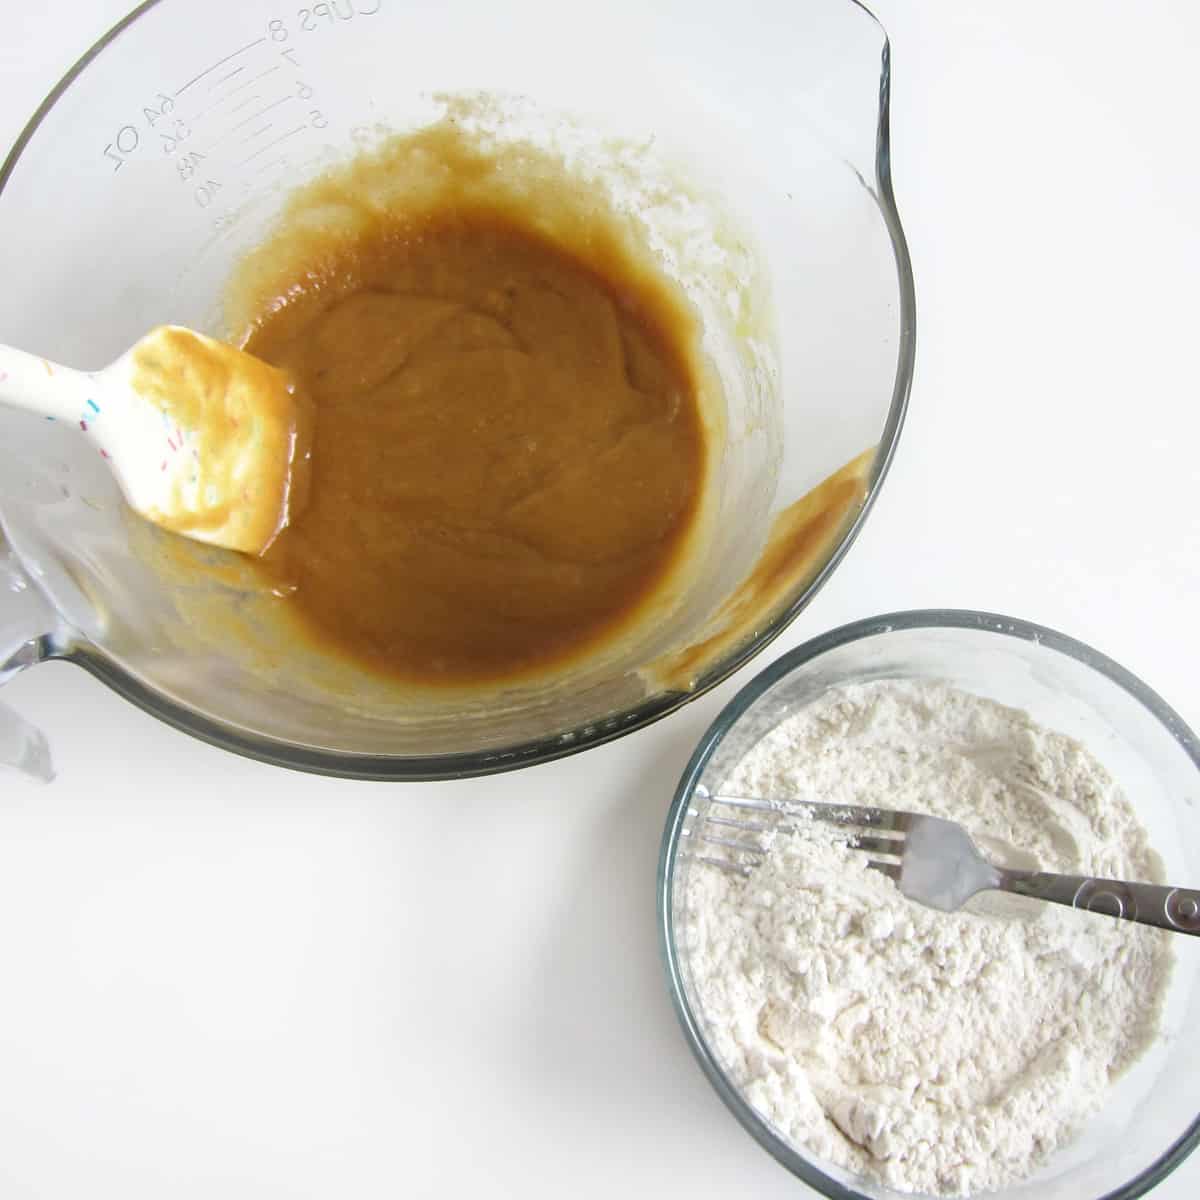 peanut butter cookie dough ingredients with wet ingredients mixed in one bowl and the dry ingredients mixed in another bowl